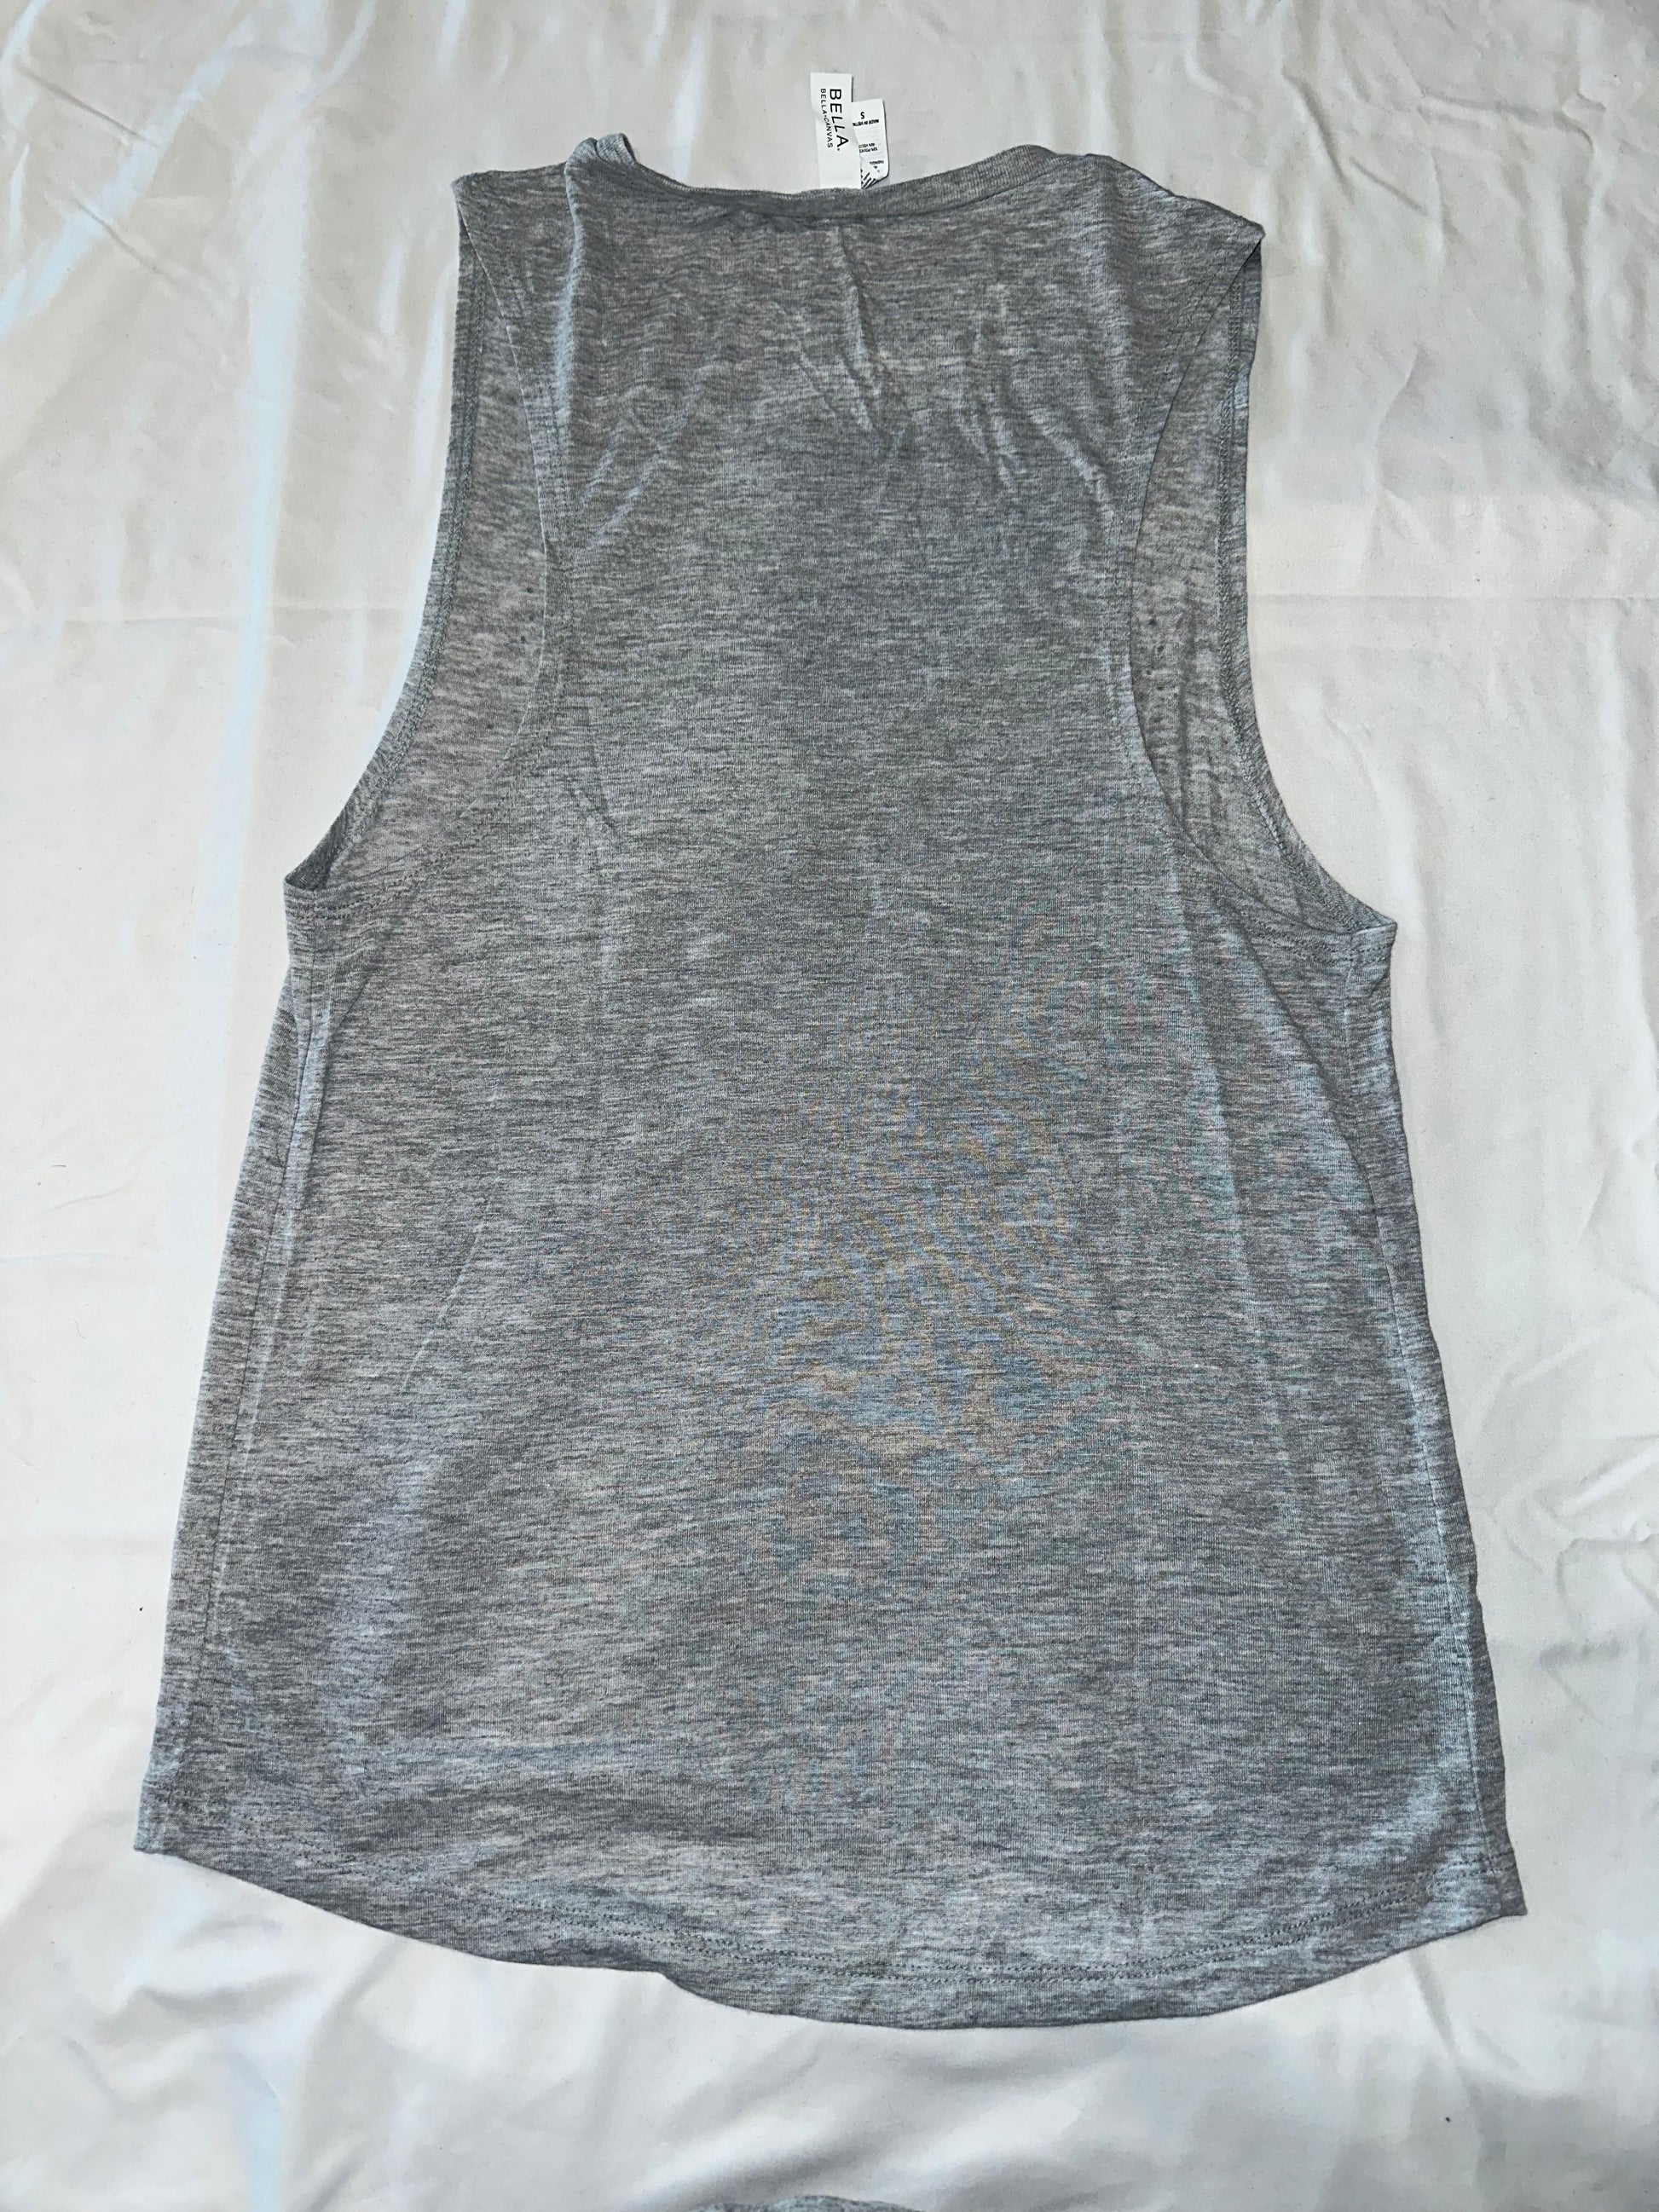 Grey Muscle Tank Top with Black Bling Design – CALI All Stars ProShop